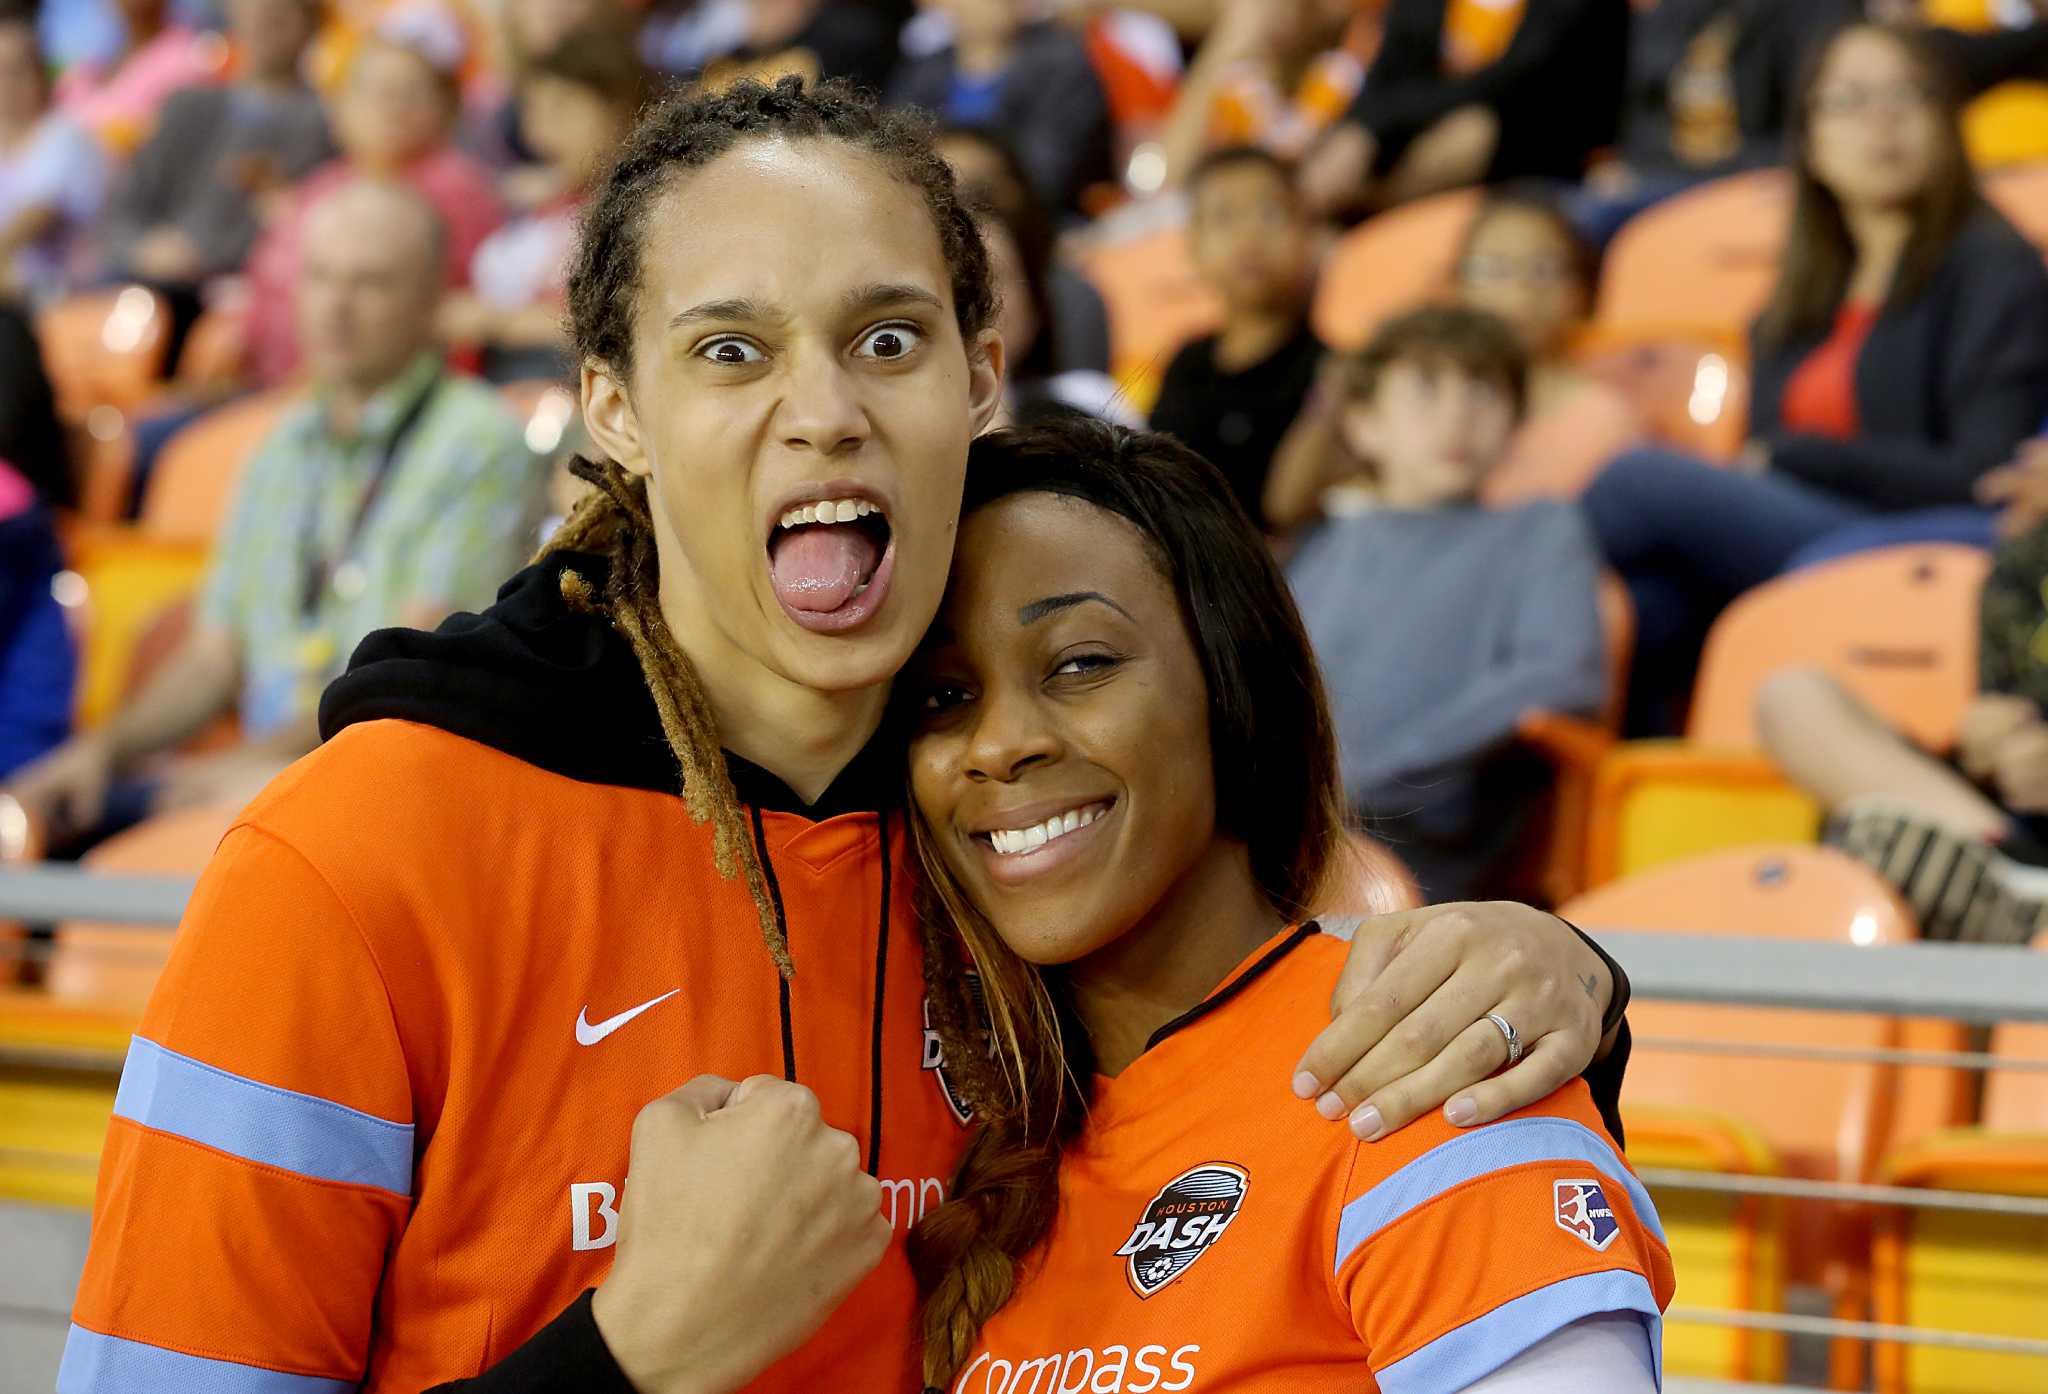 Wnba Star Brittney Griner Embroiled In Alimony Dispute With Spouse